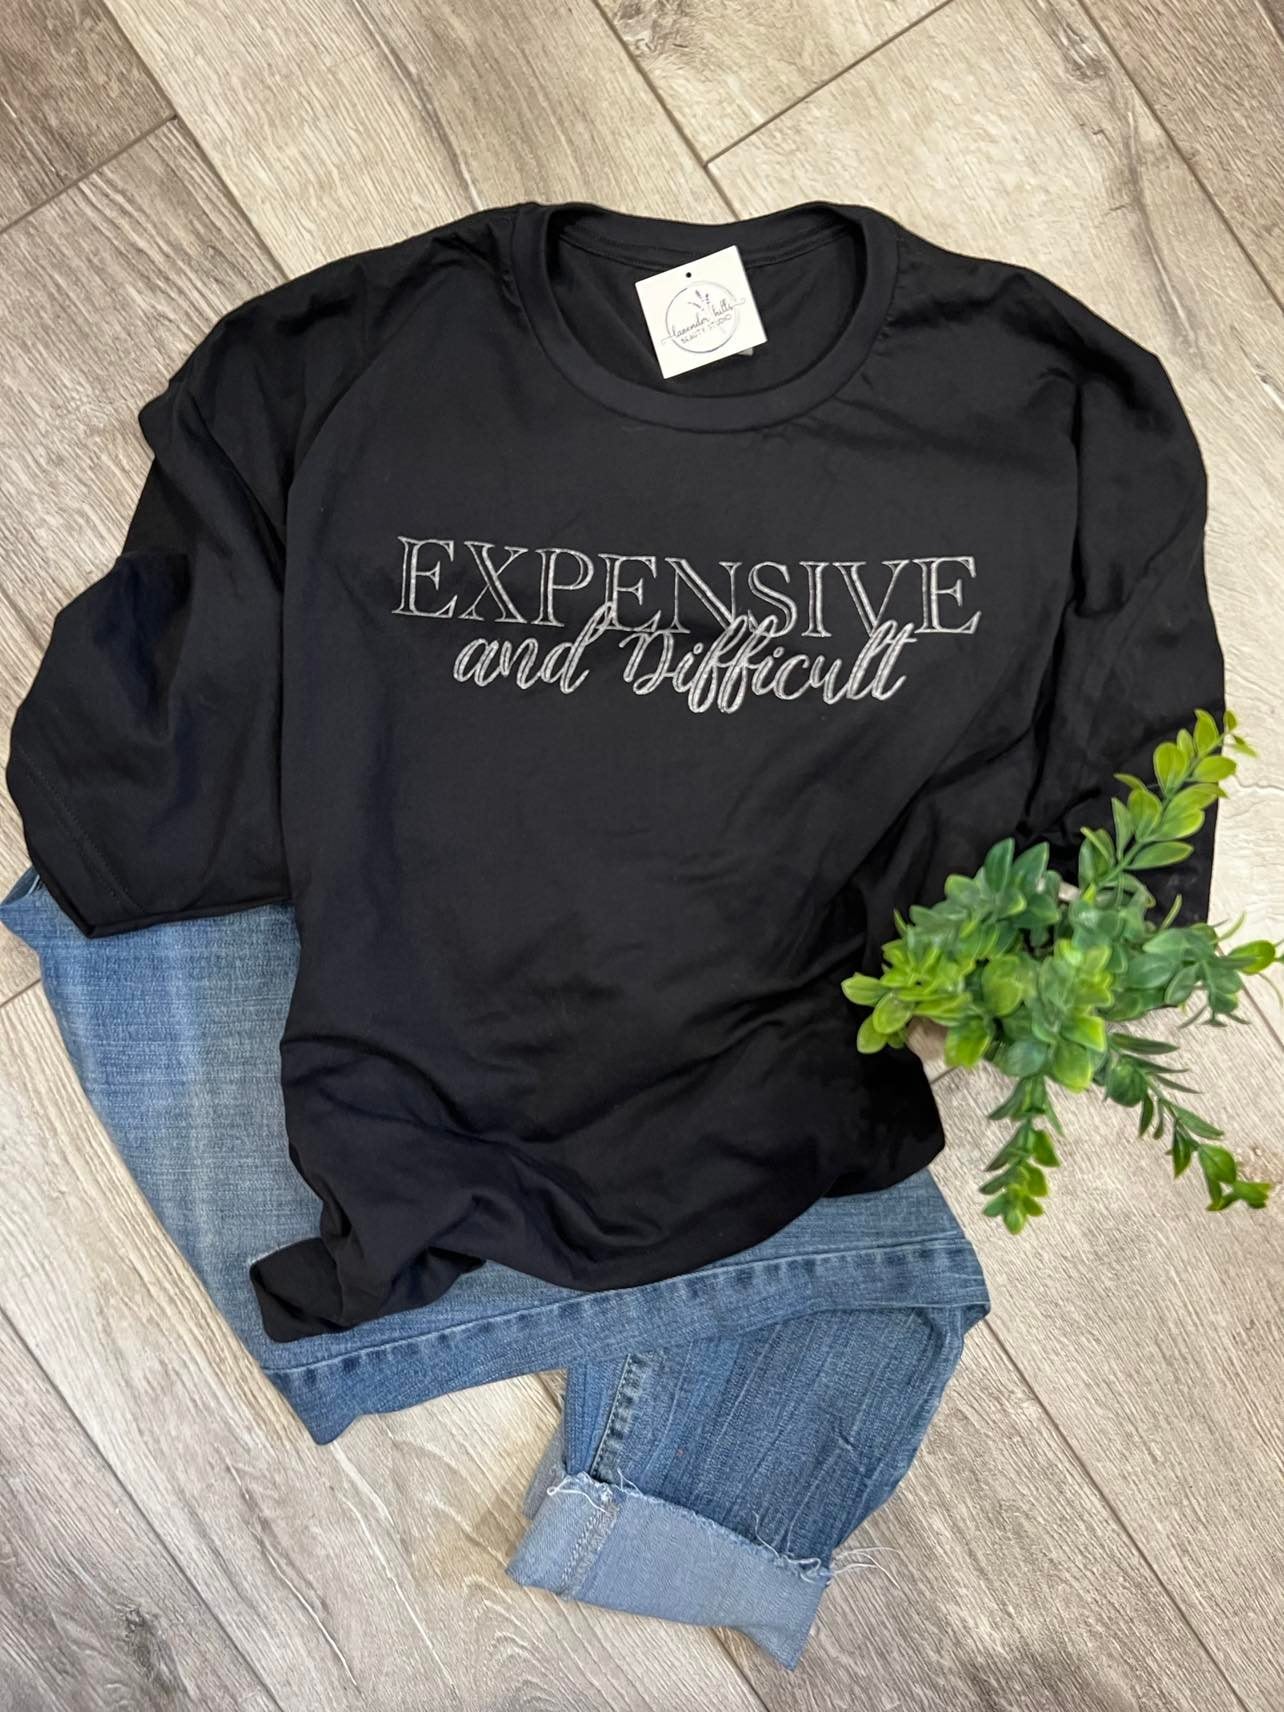 Expensive and Difficult T-Shirt - Lavender Hills BeautyShe Shed Wholesale